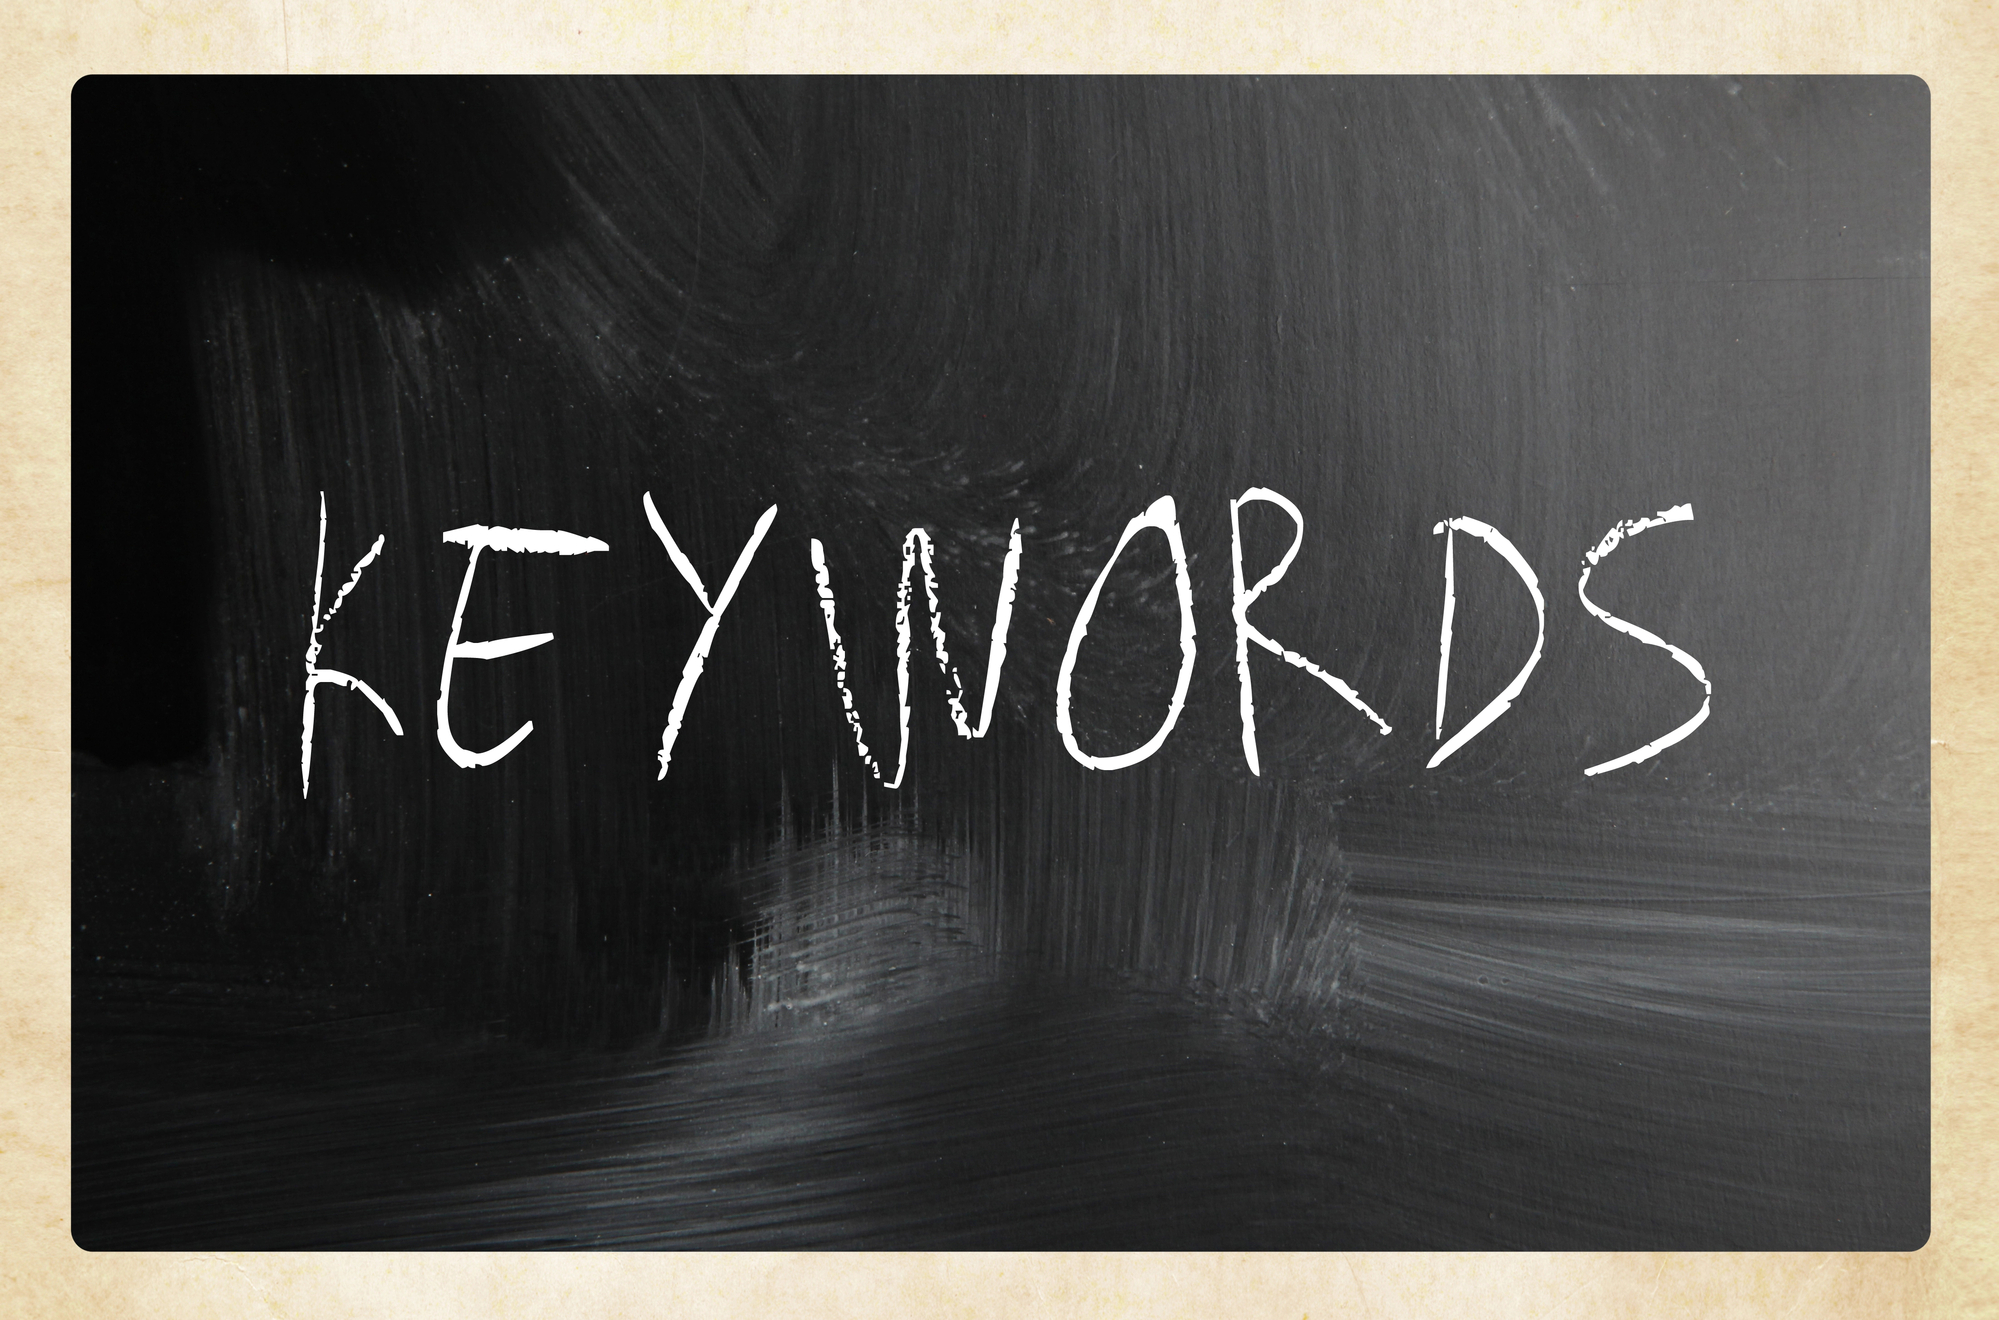 How To Do Keyword Research - edge of the web radio show